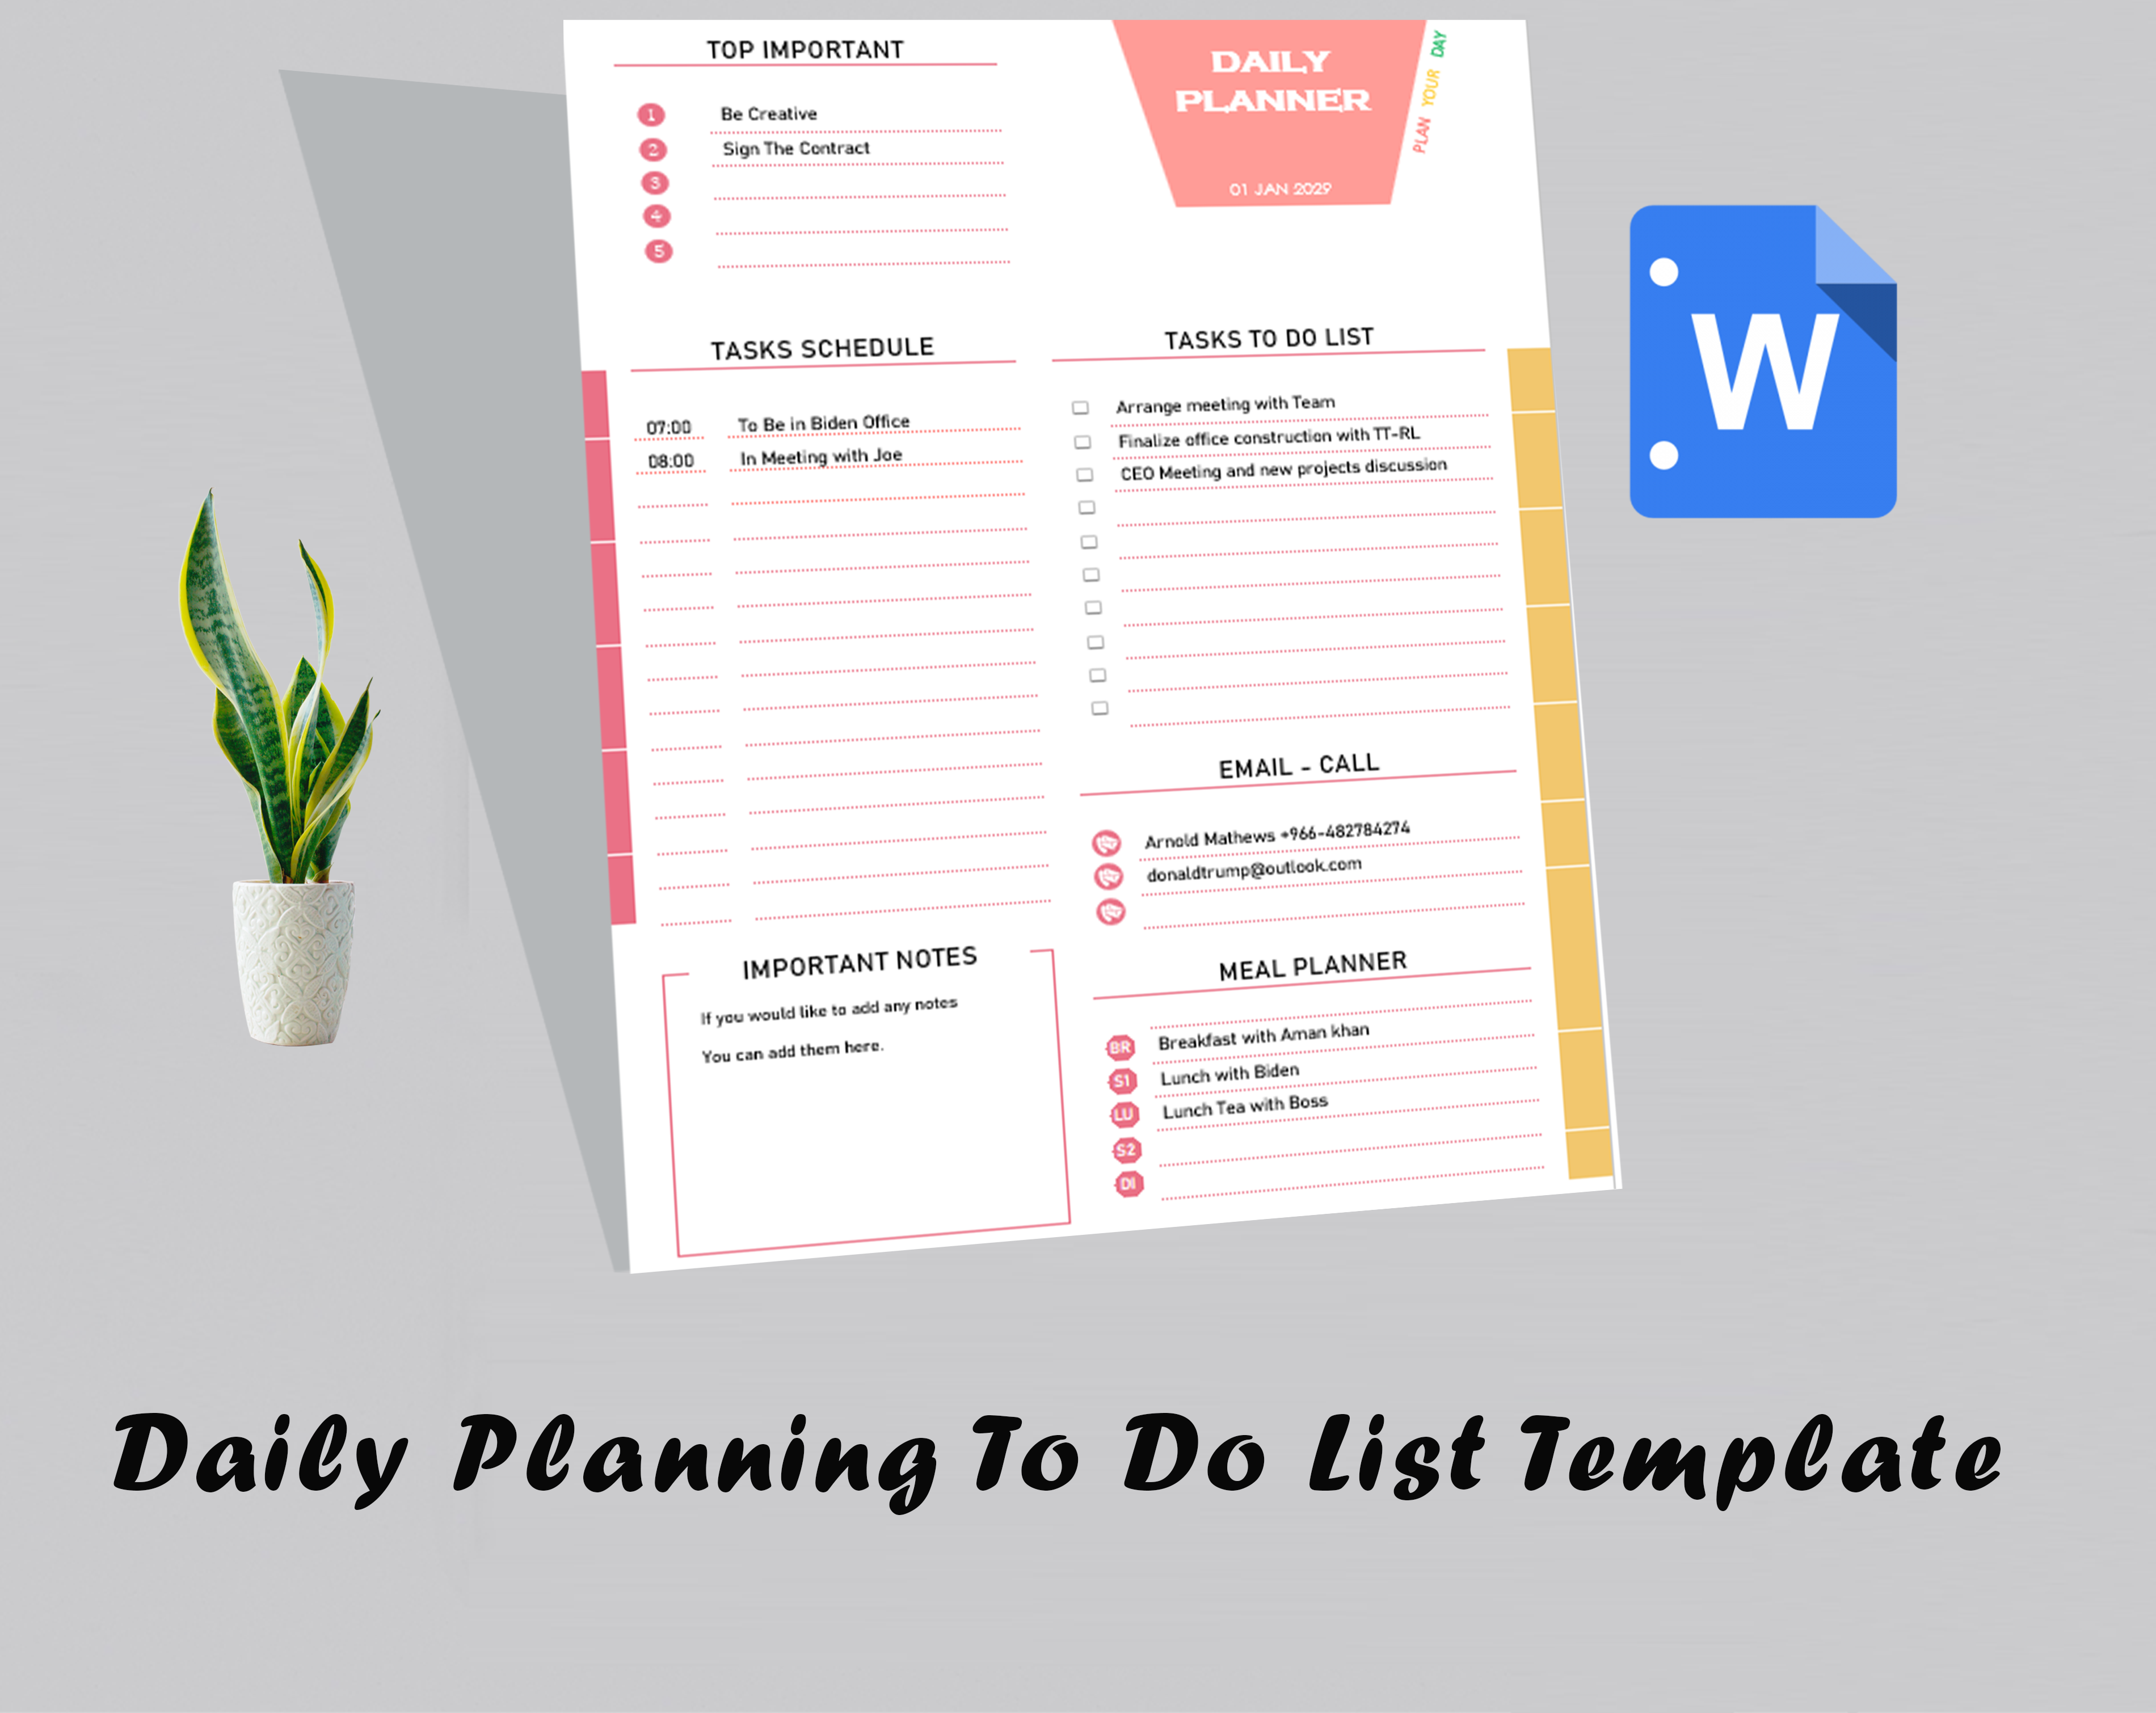 Daily Planning To Do List Template